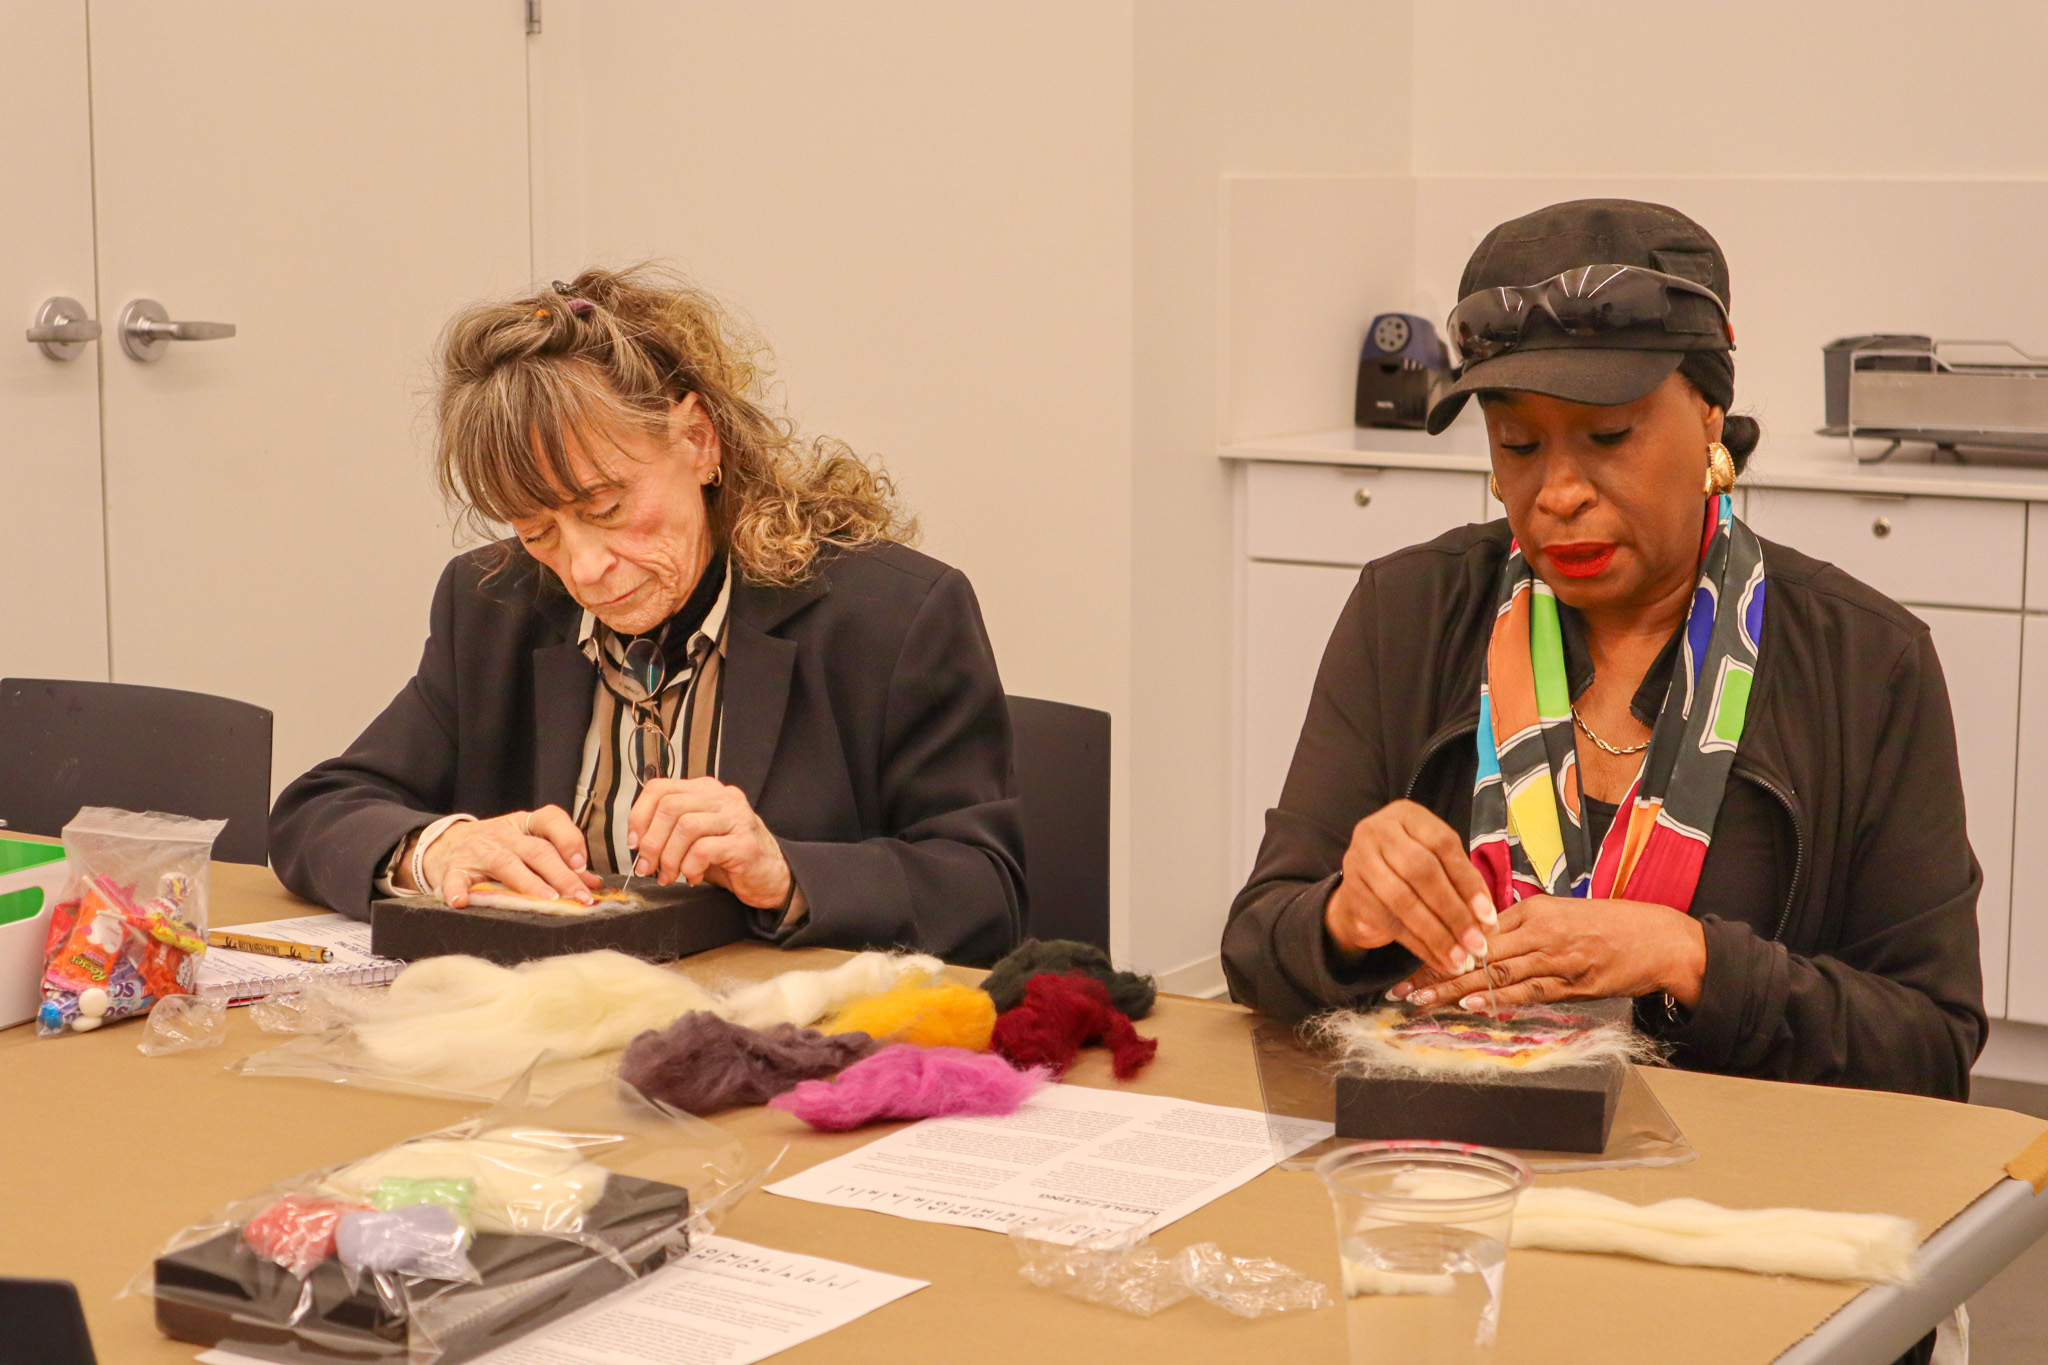 An older white and Black woman sit next to each other at a table, surrounded by colorful wool. They are both focused working on a felting project.